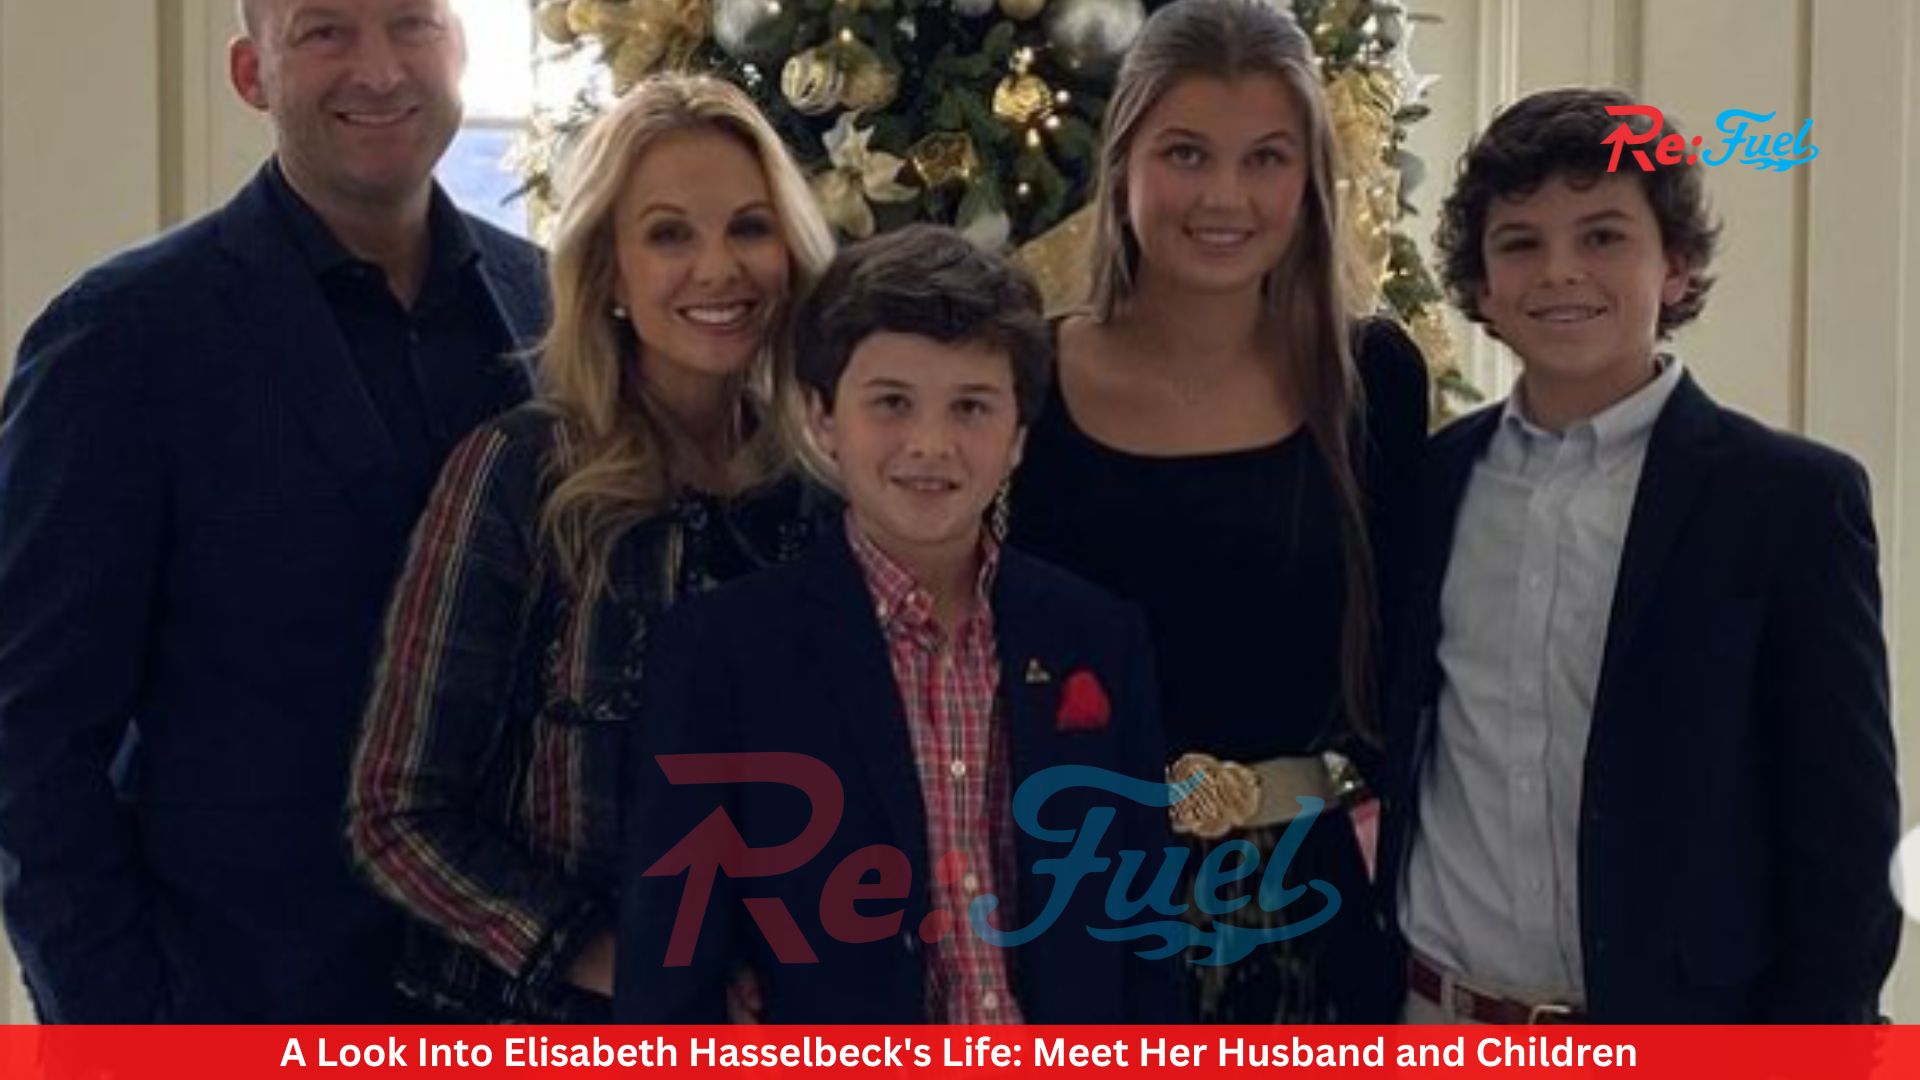 A Look Into Elisabeth Hasselbeck's Life: Meet Her Husband and Children